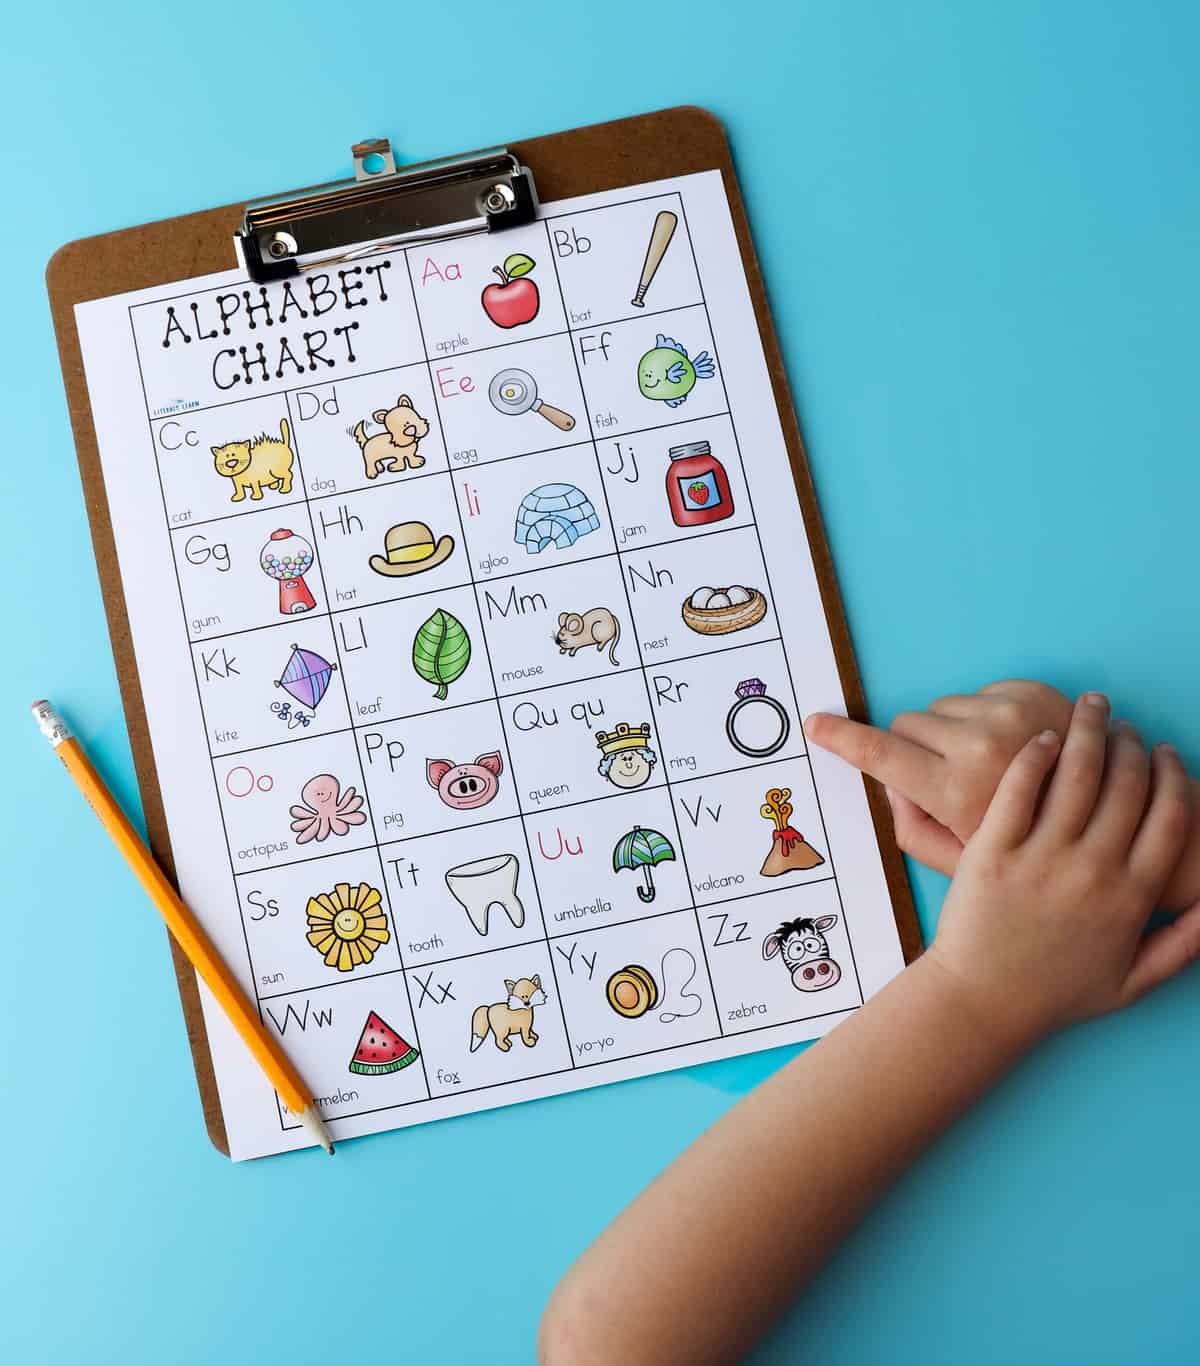 Blue background and clipboard with free ABC chart on it with a child's hand pointing to the letters.